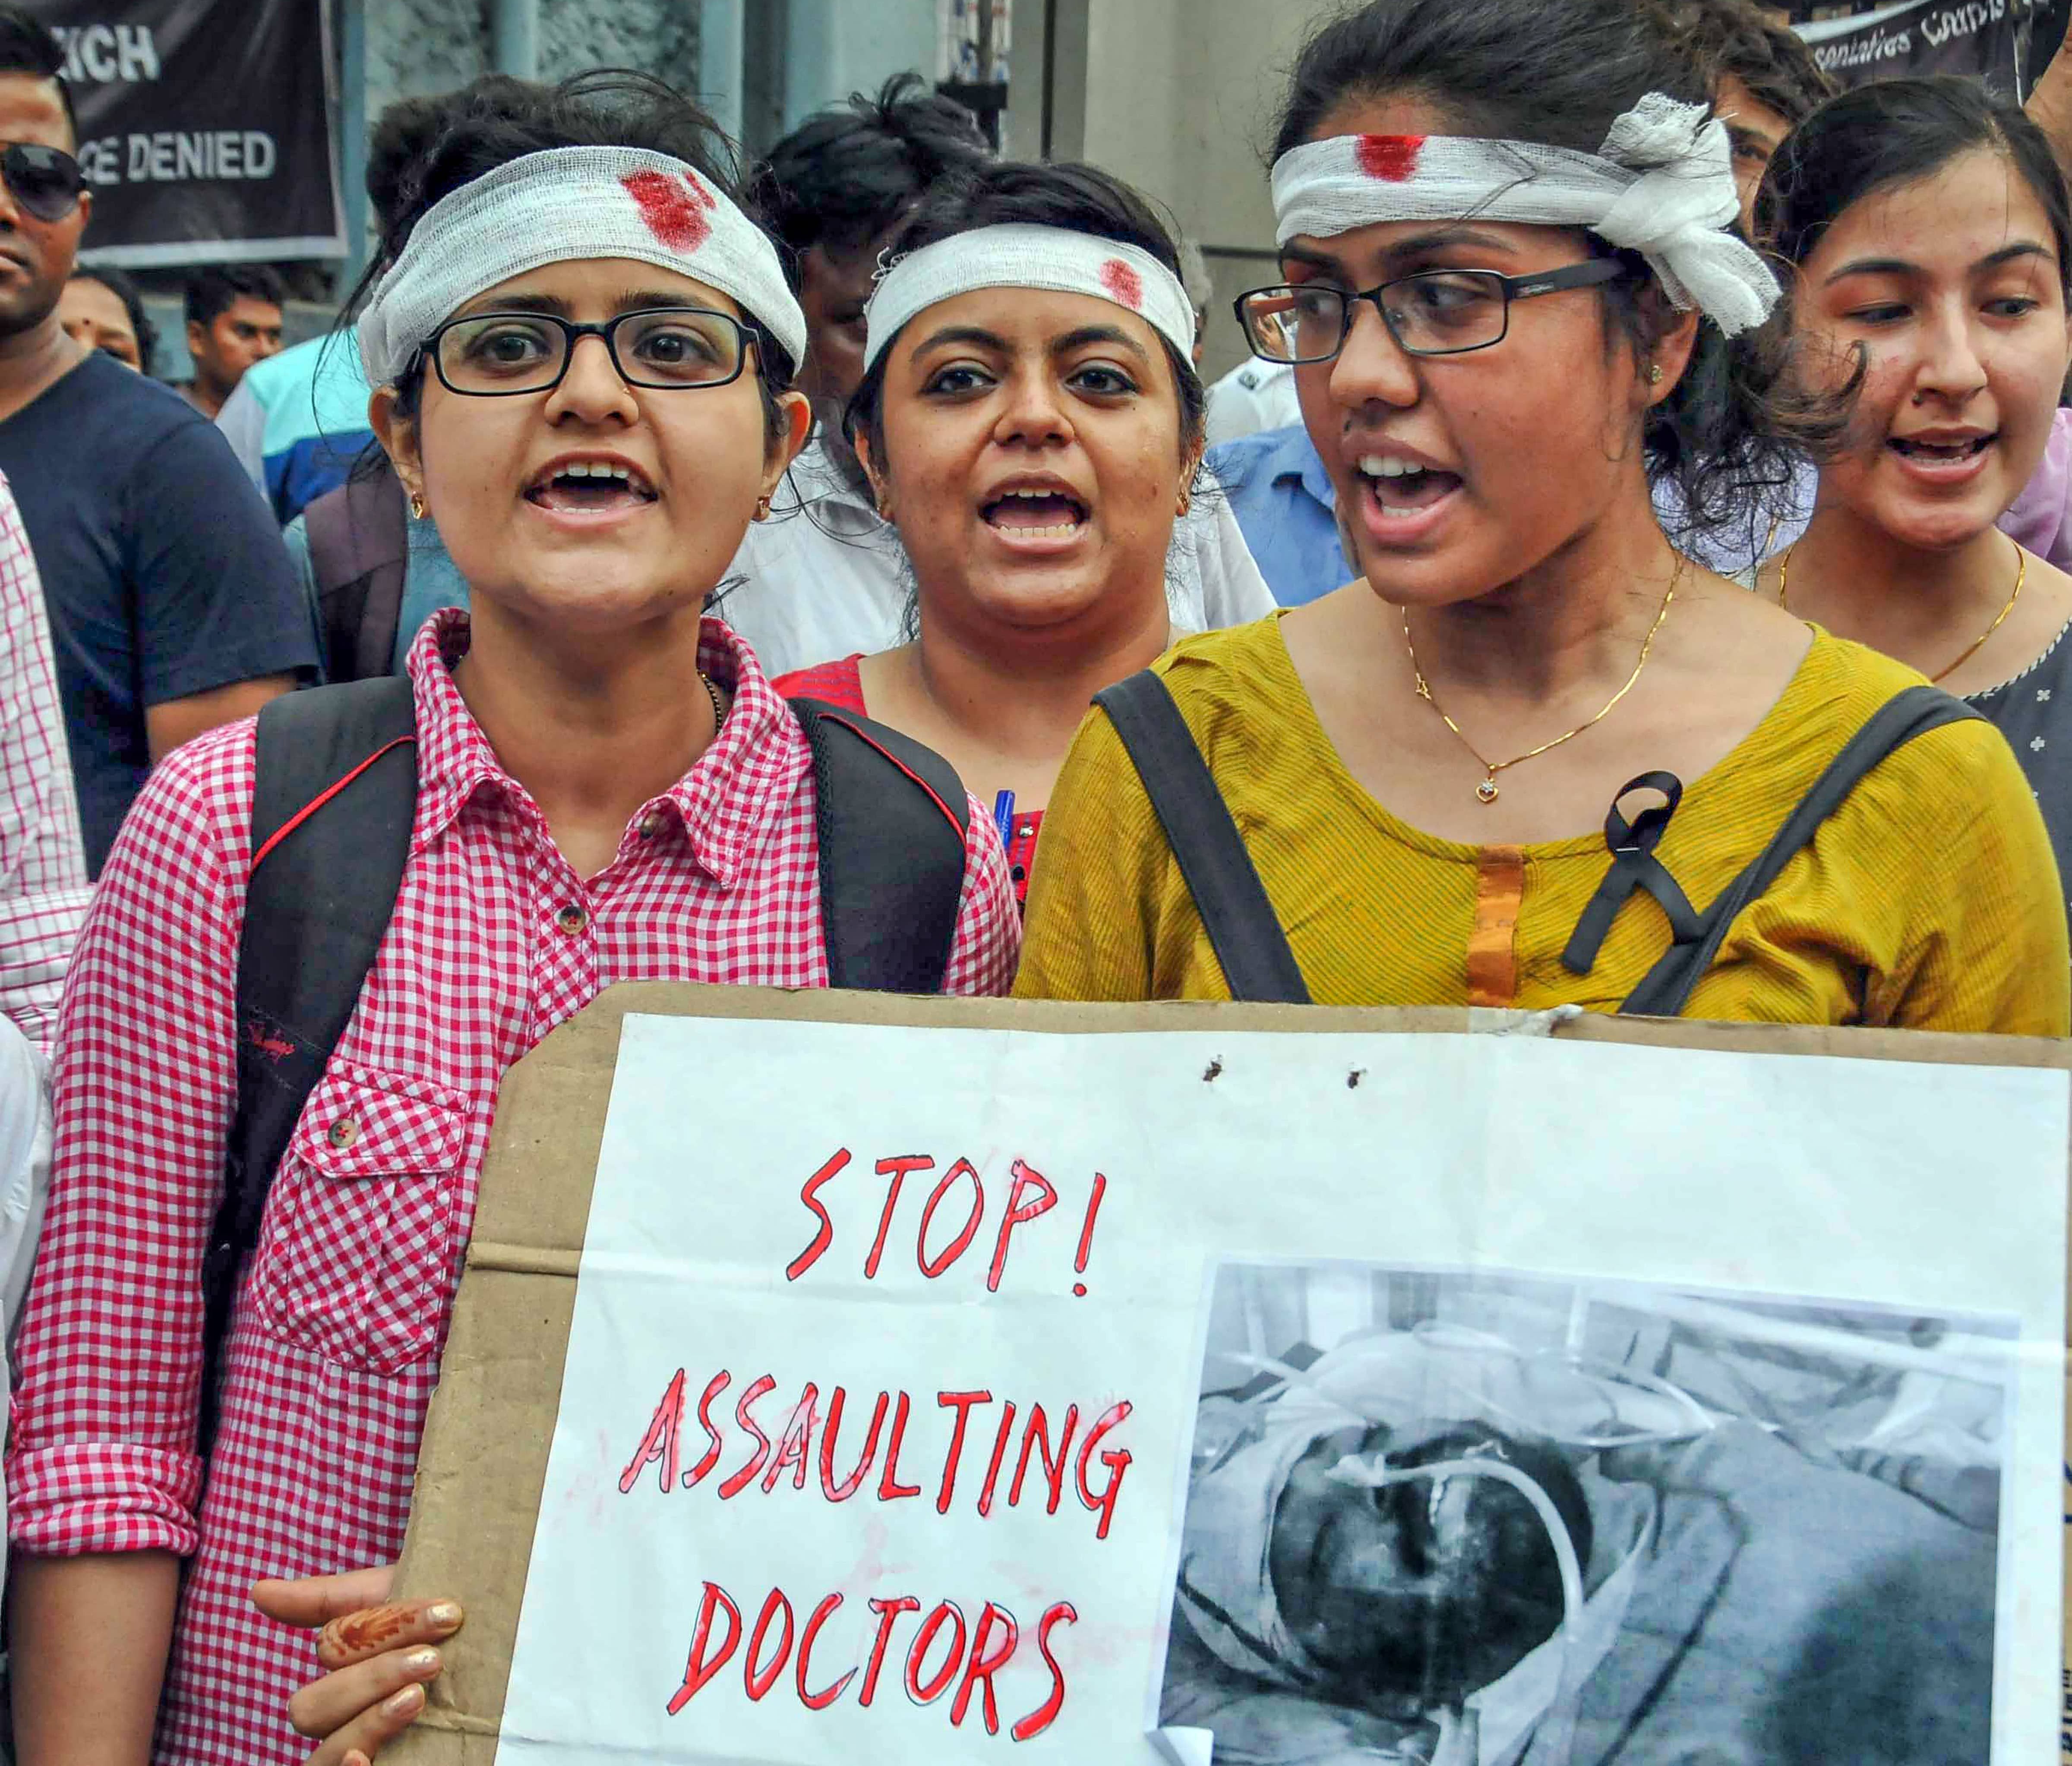 Mamata can choose venue, but meeting should be held in open, say protesting docs